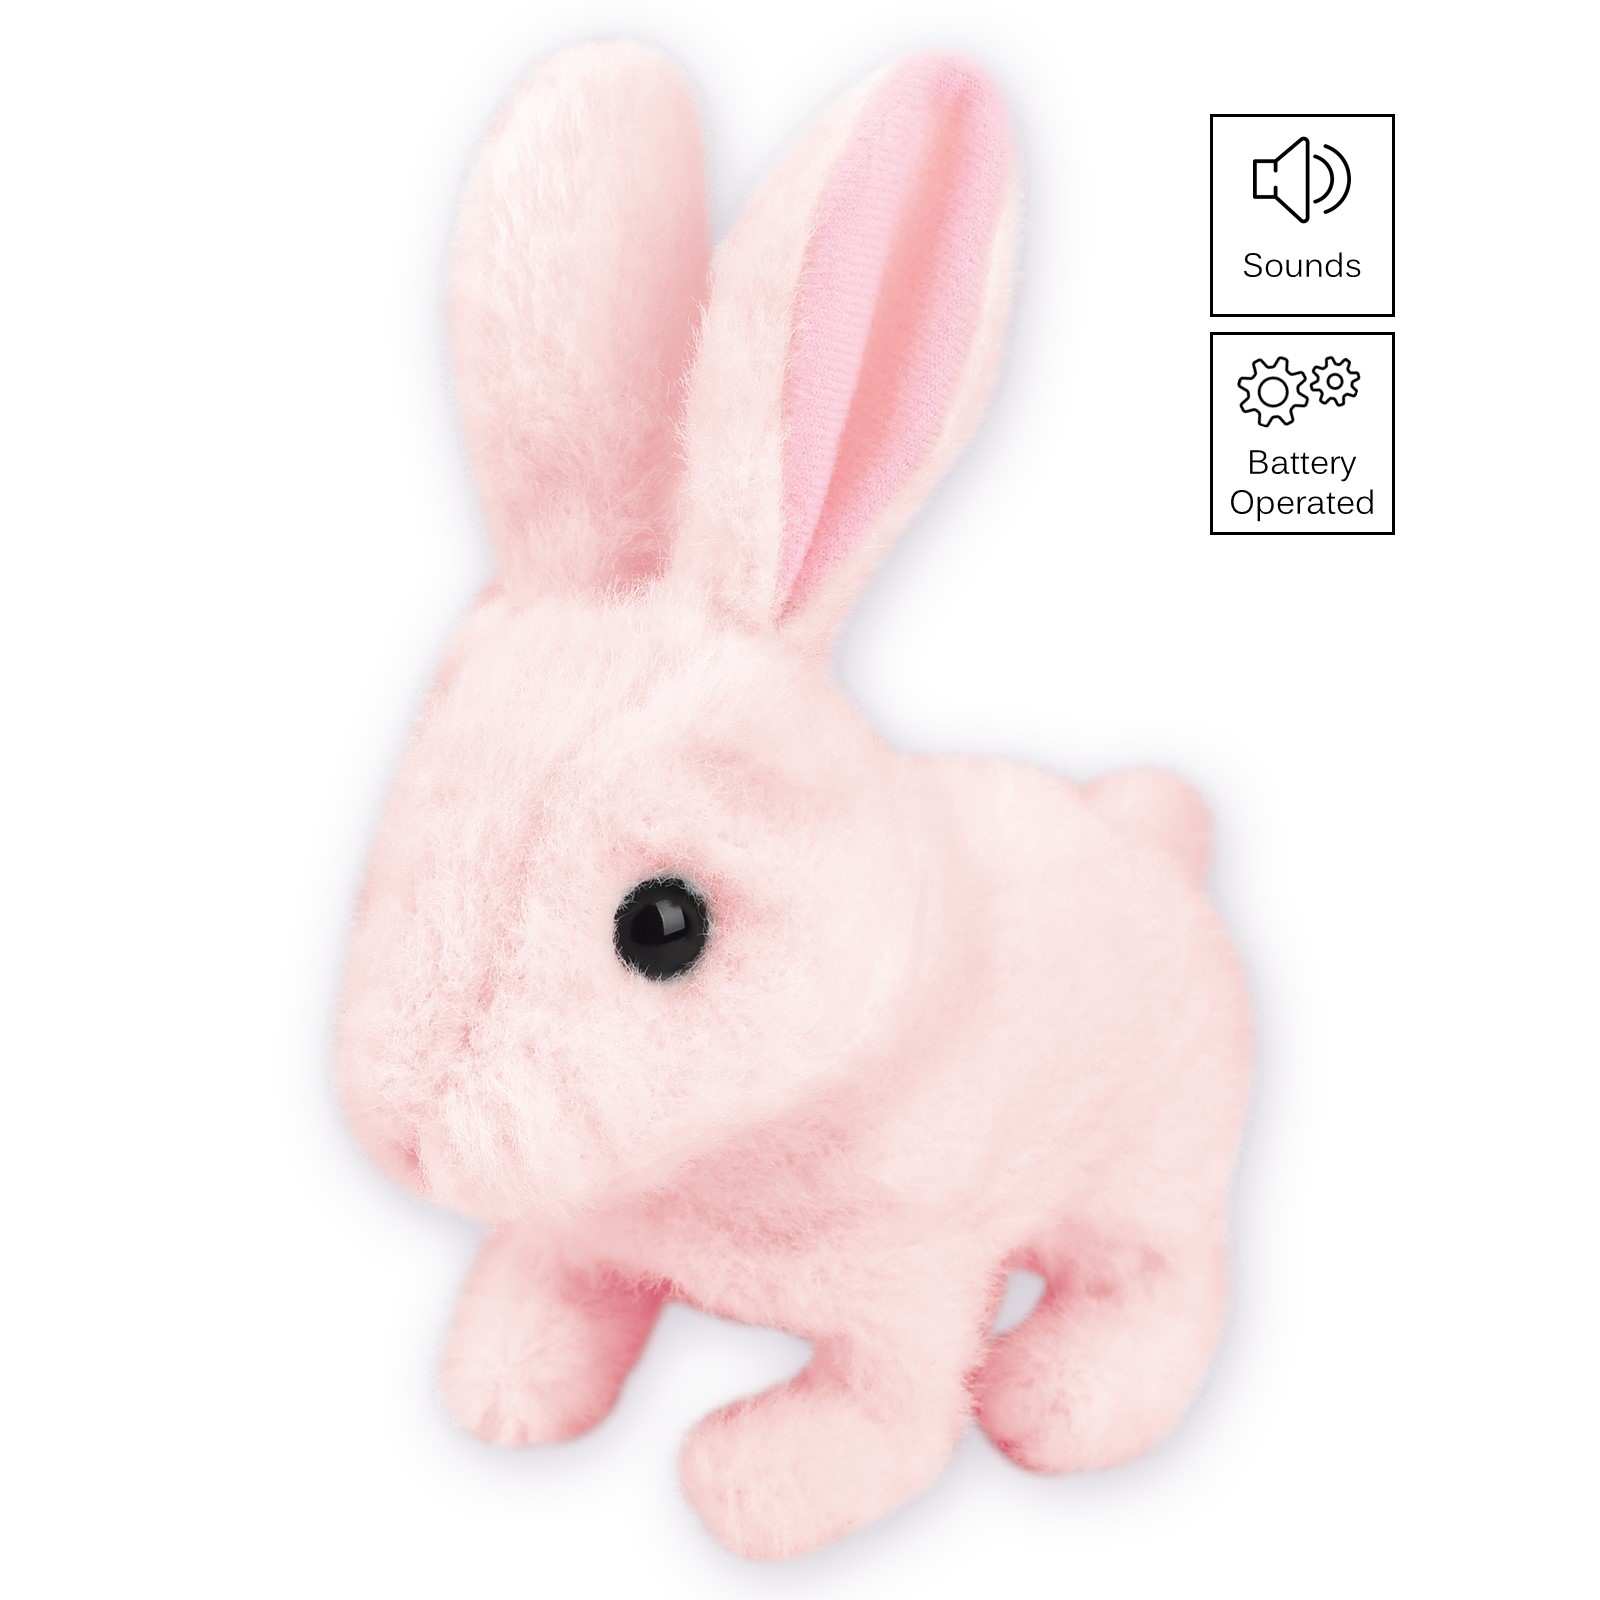 Playful Bunny Hops Around Makes Sounds Wiggles Ears And Nose Cute Interactive Rabbit Kids Soft Cuddly Electronic Pet Battery Toy Animal Great Gift For Preschool Children Boy Girl Toddler Easter PINK TC-31-P